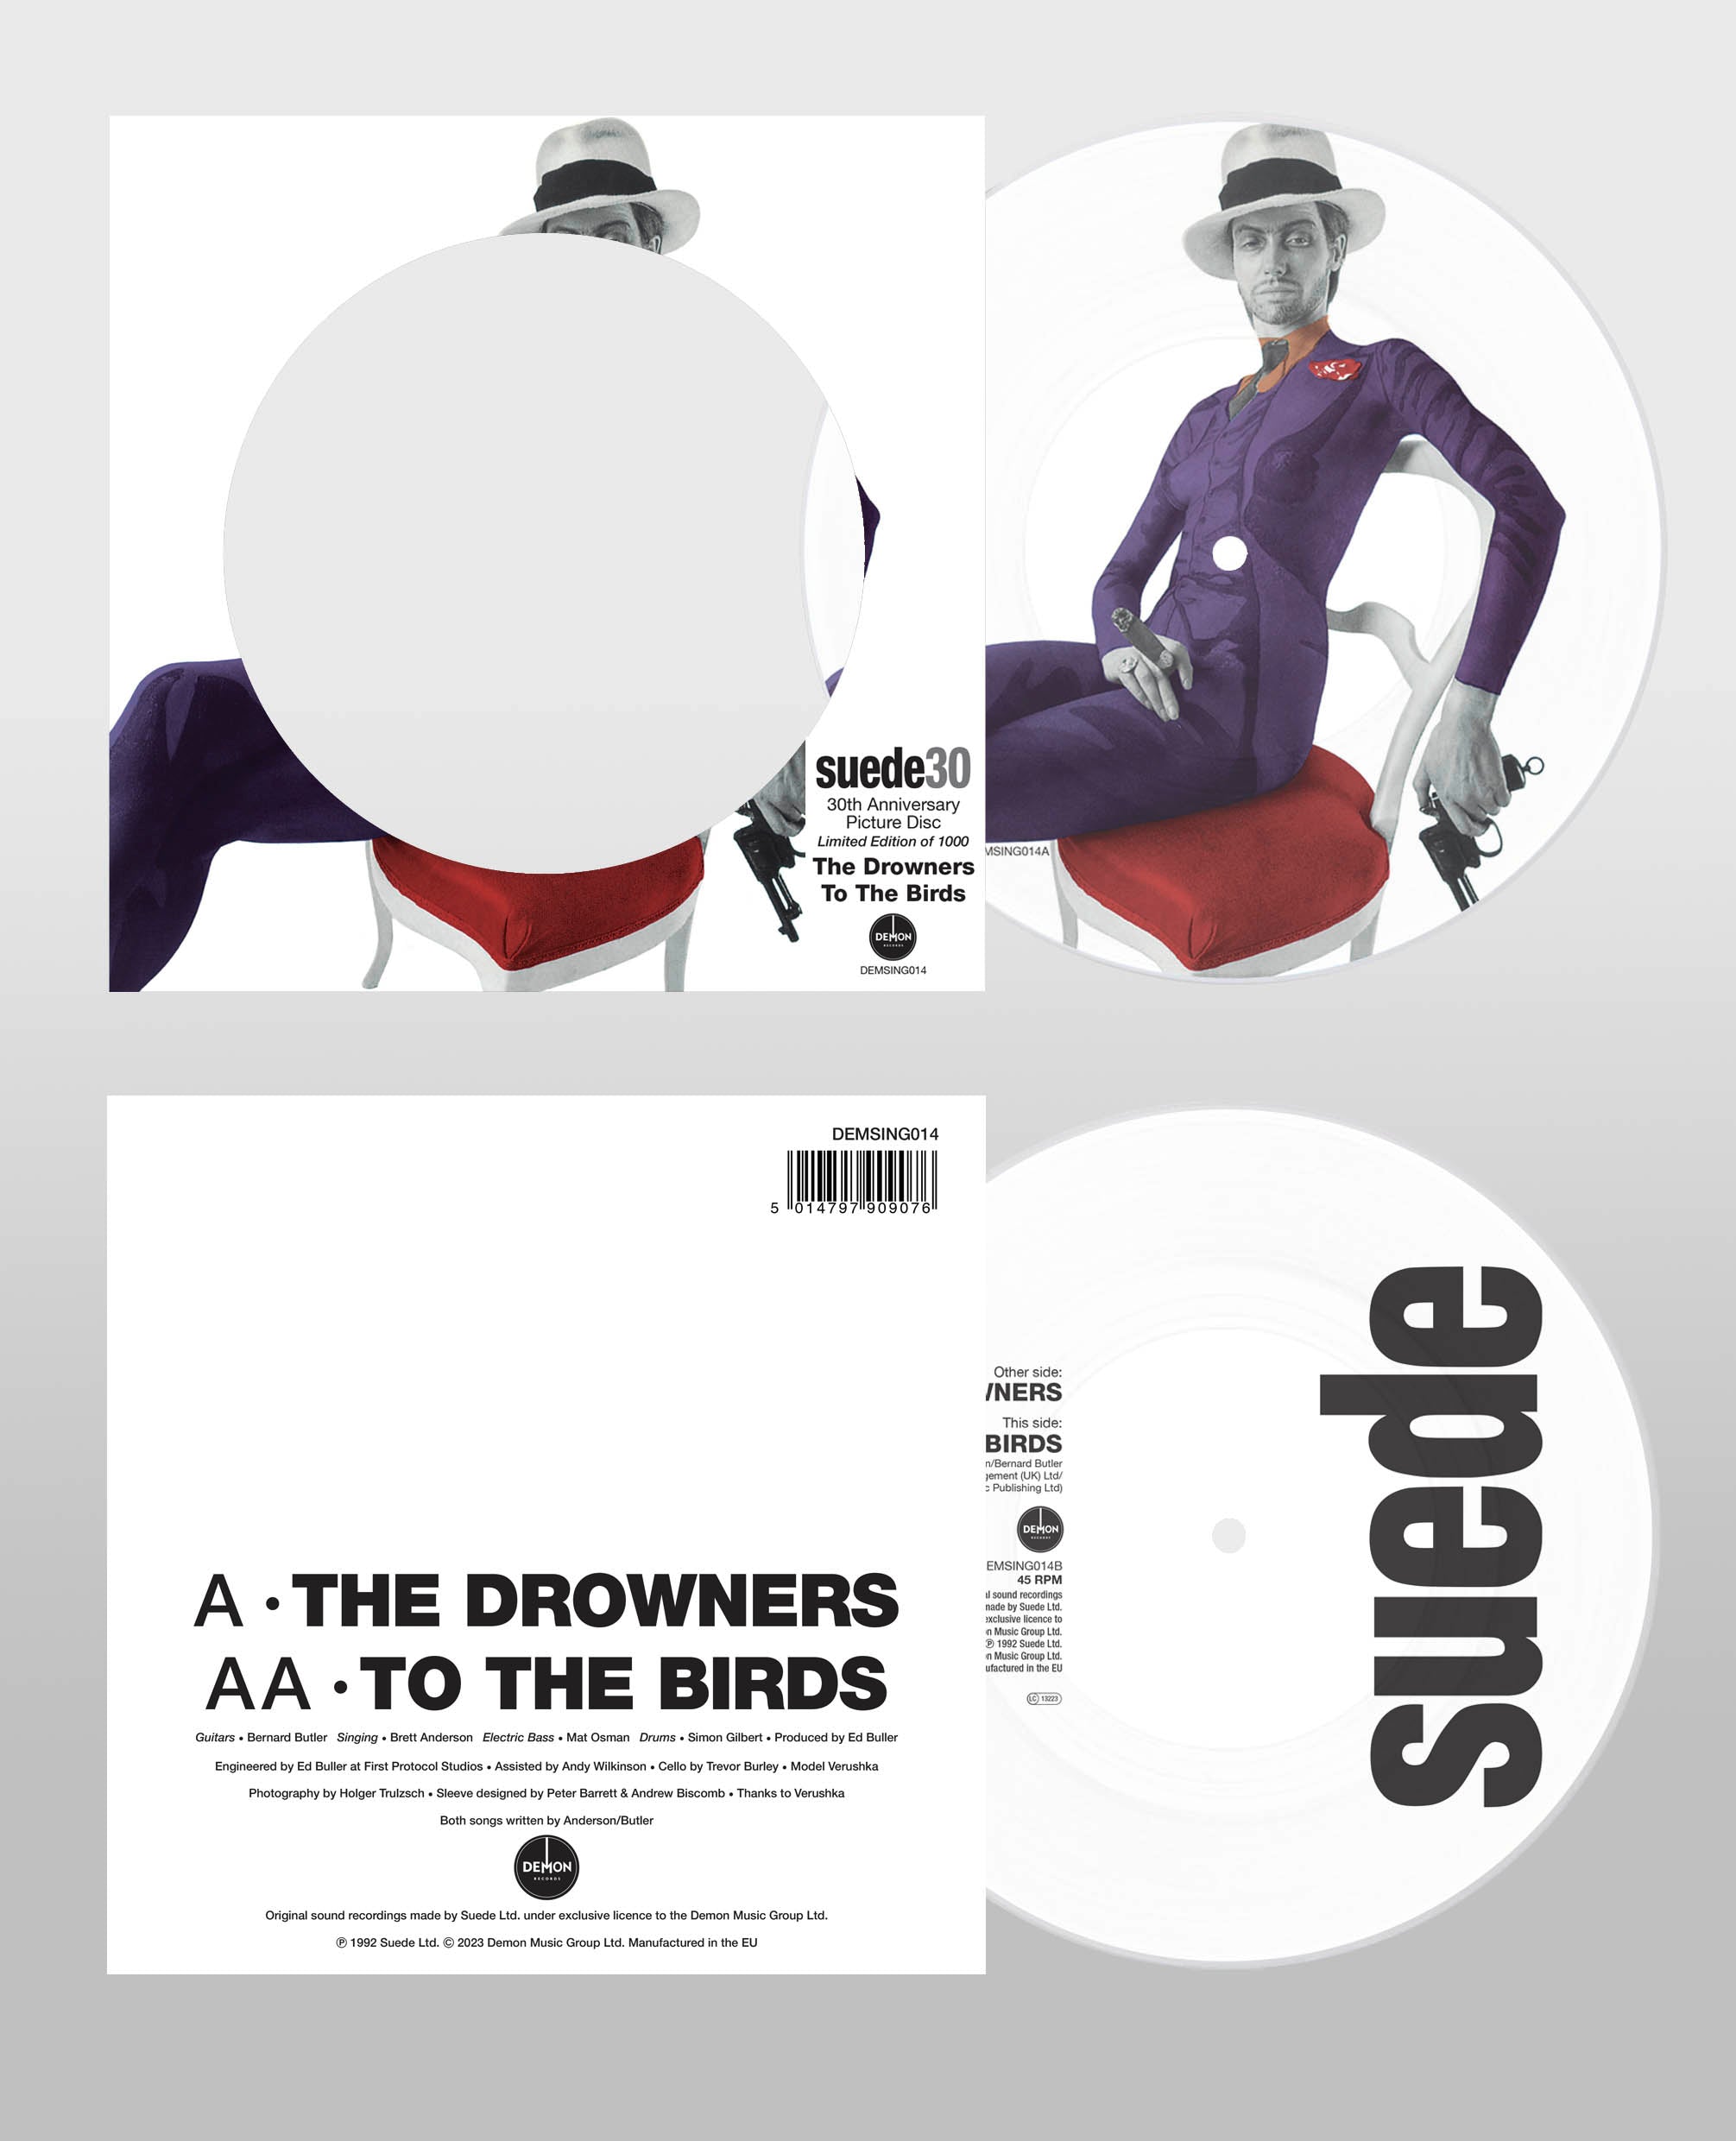 Suede - The Drowners (30th Anniversary Edition): Vinyl 7" Picture Disc